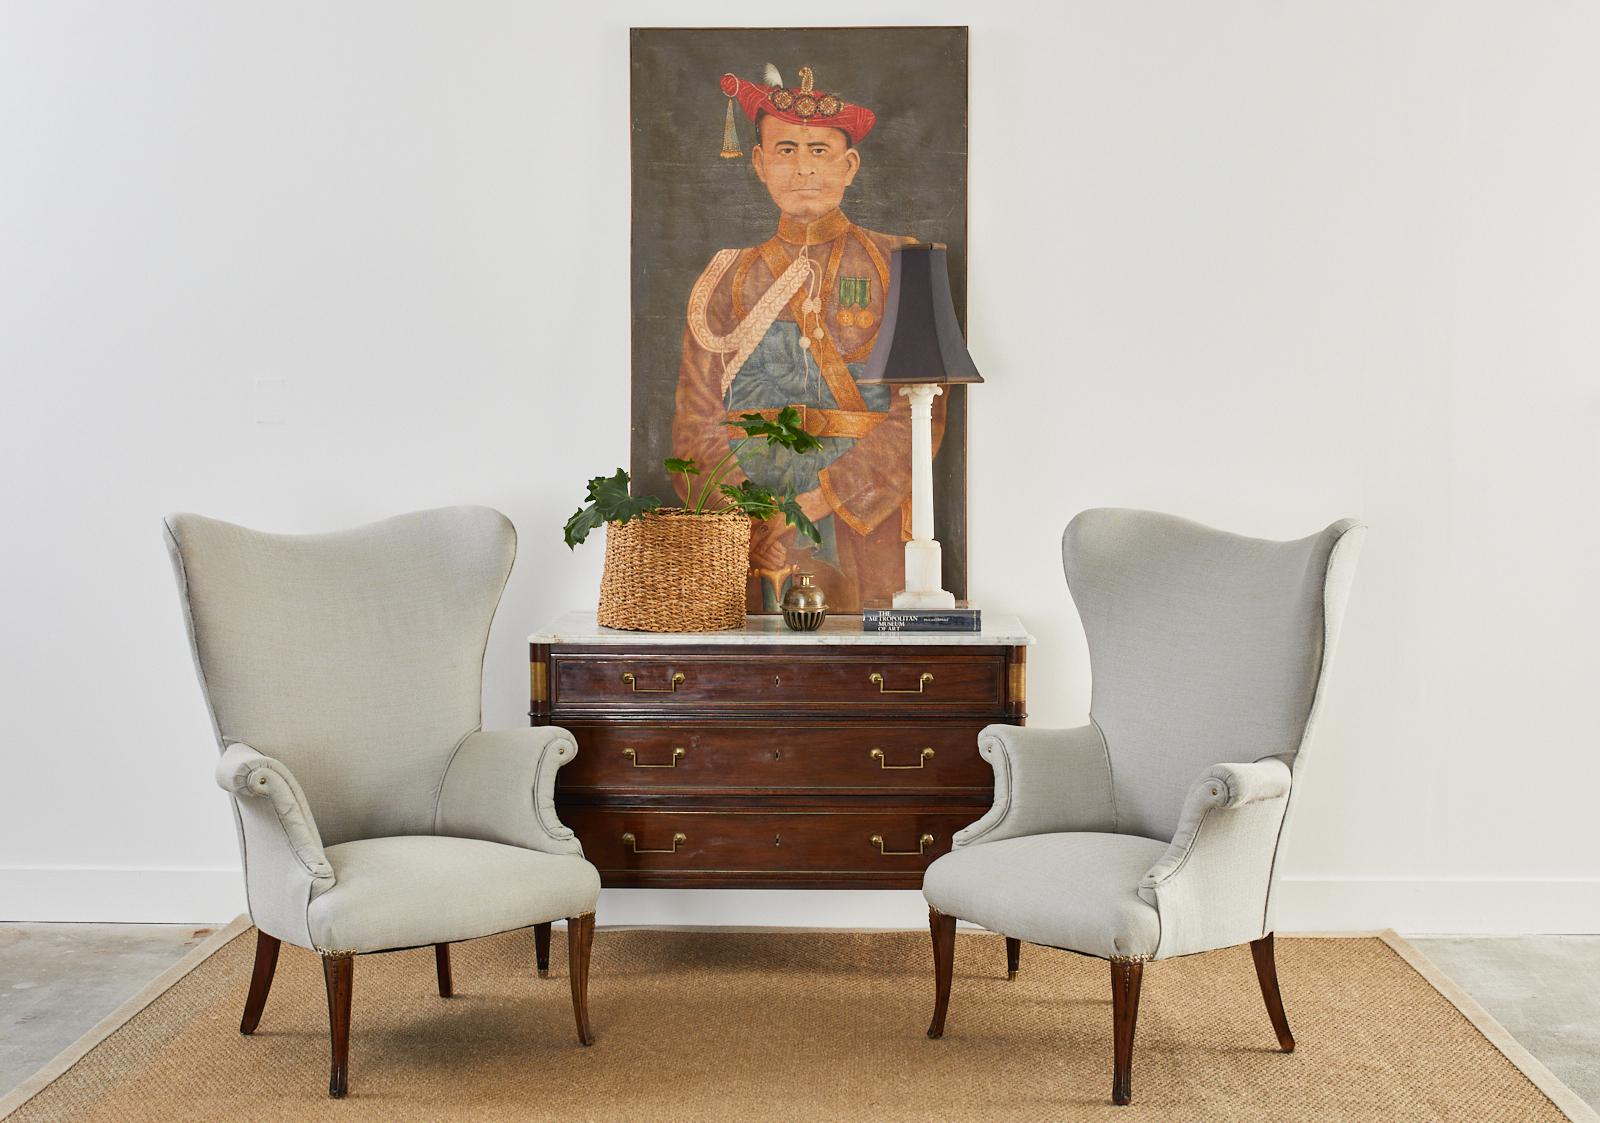 Extraordinary pair of Mid-Century Modern wingback armchairs featuring hardwood frames with newly upholstered seating surfaces. The stylish large wings are reminiscent of Edward Wormley's designs for Dunbar with their thin sleek shape. The chairs